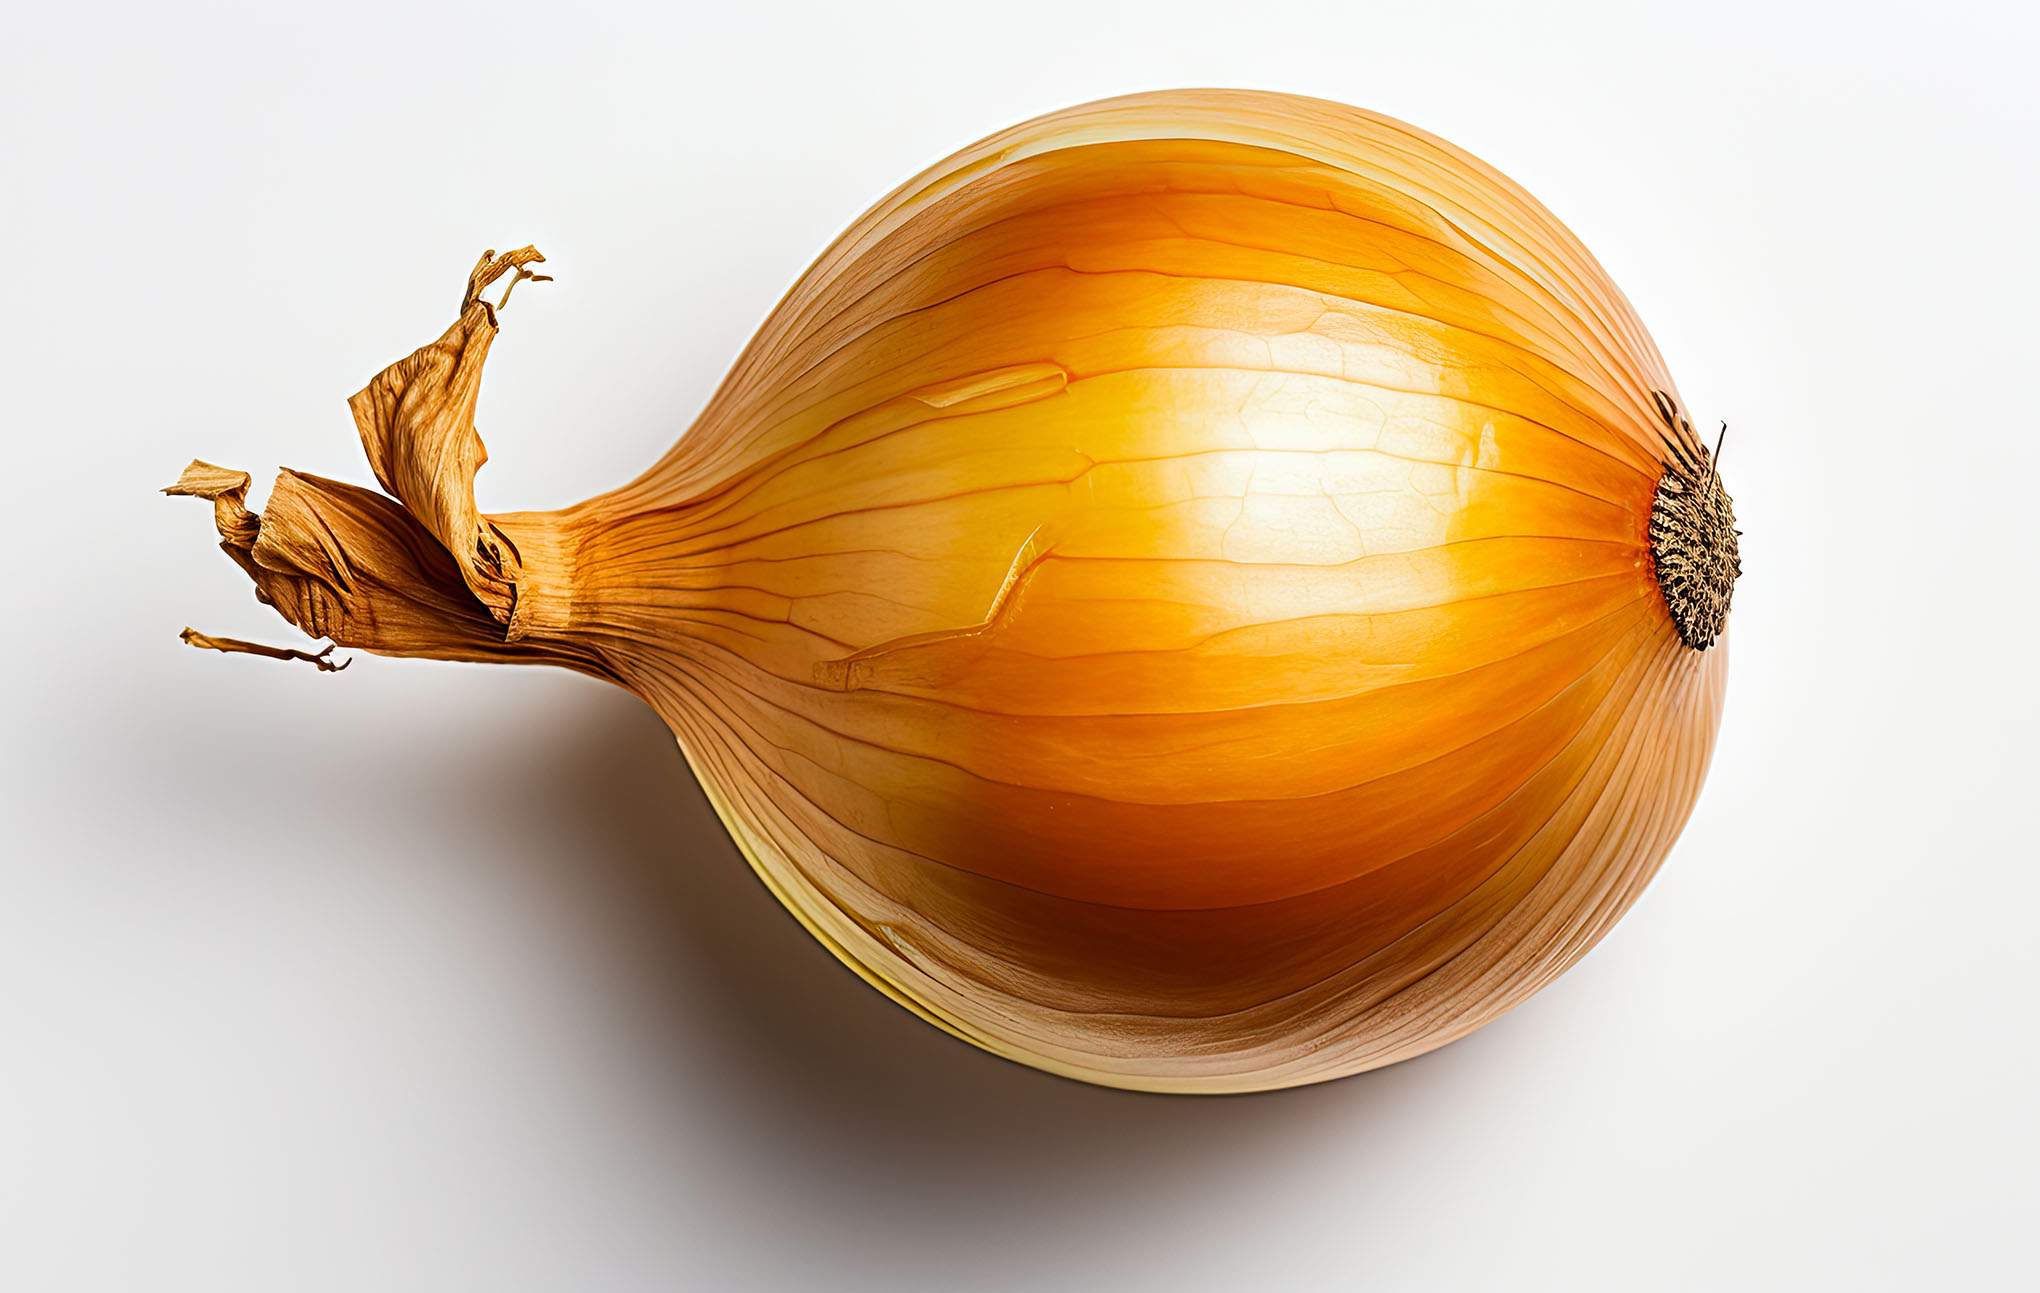 A high-resolution image of a whole onion with a glossy, translucent skin. the onion shows a rich gradient from pale yellow at its base to deep amber at the top, with delicate, slightly wrinkled layers visible. the stem end features dry, curled roots.